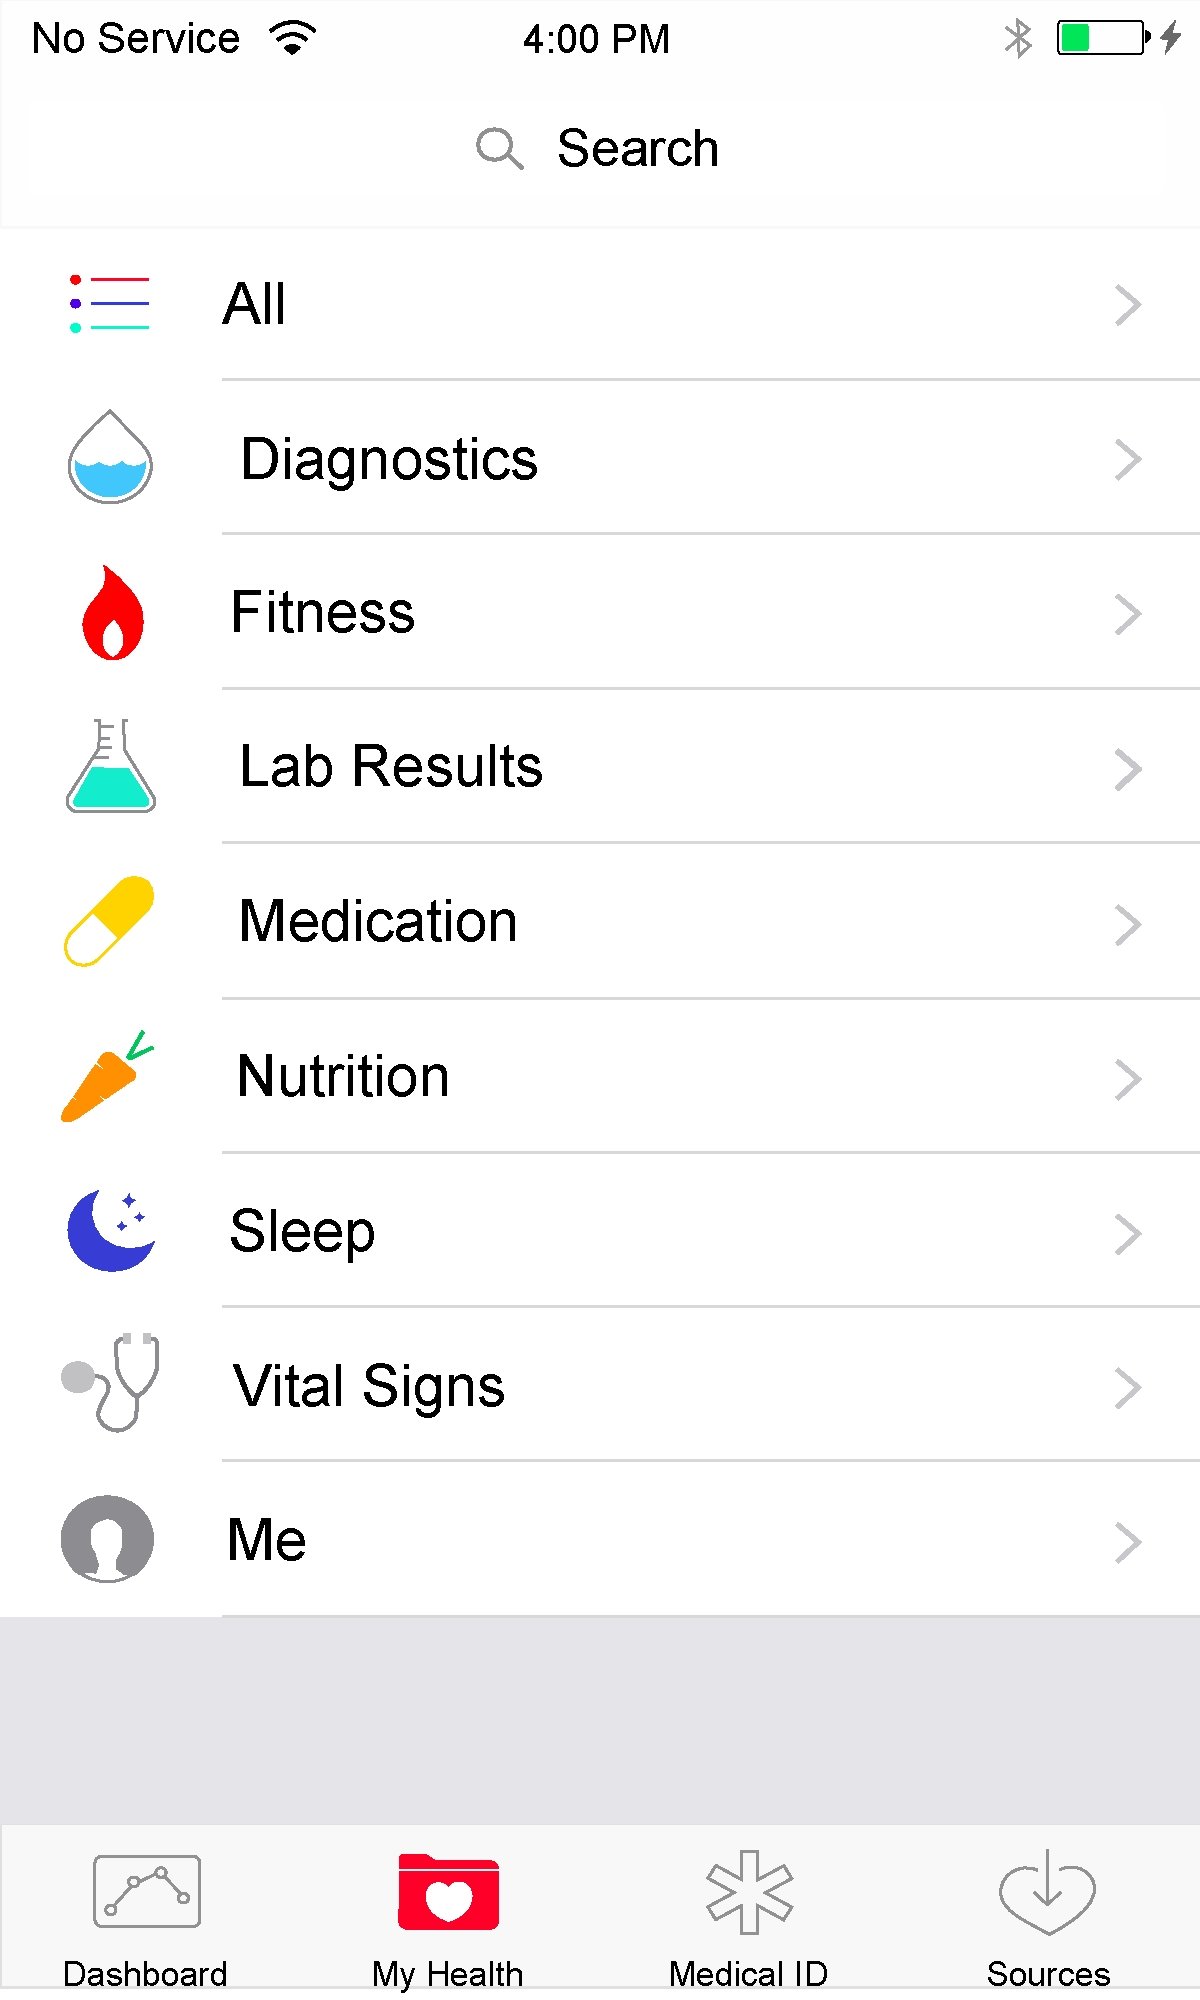 No Service 4: 00 PM Search All Diagnostics Fitness Lab Results Medication Nutrition Sleep